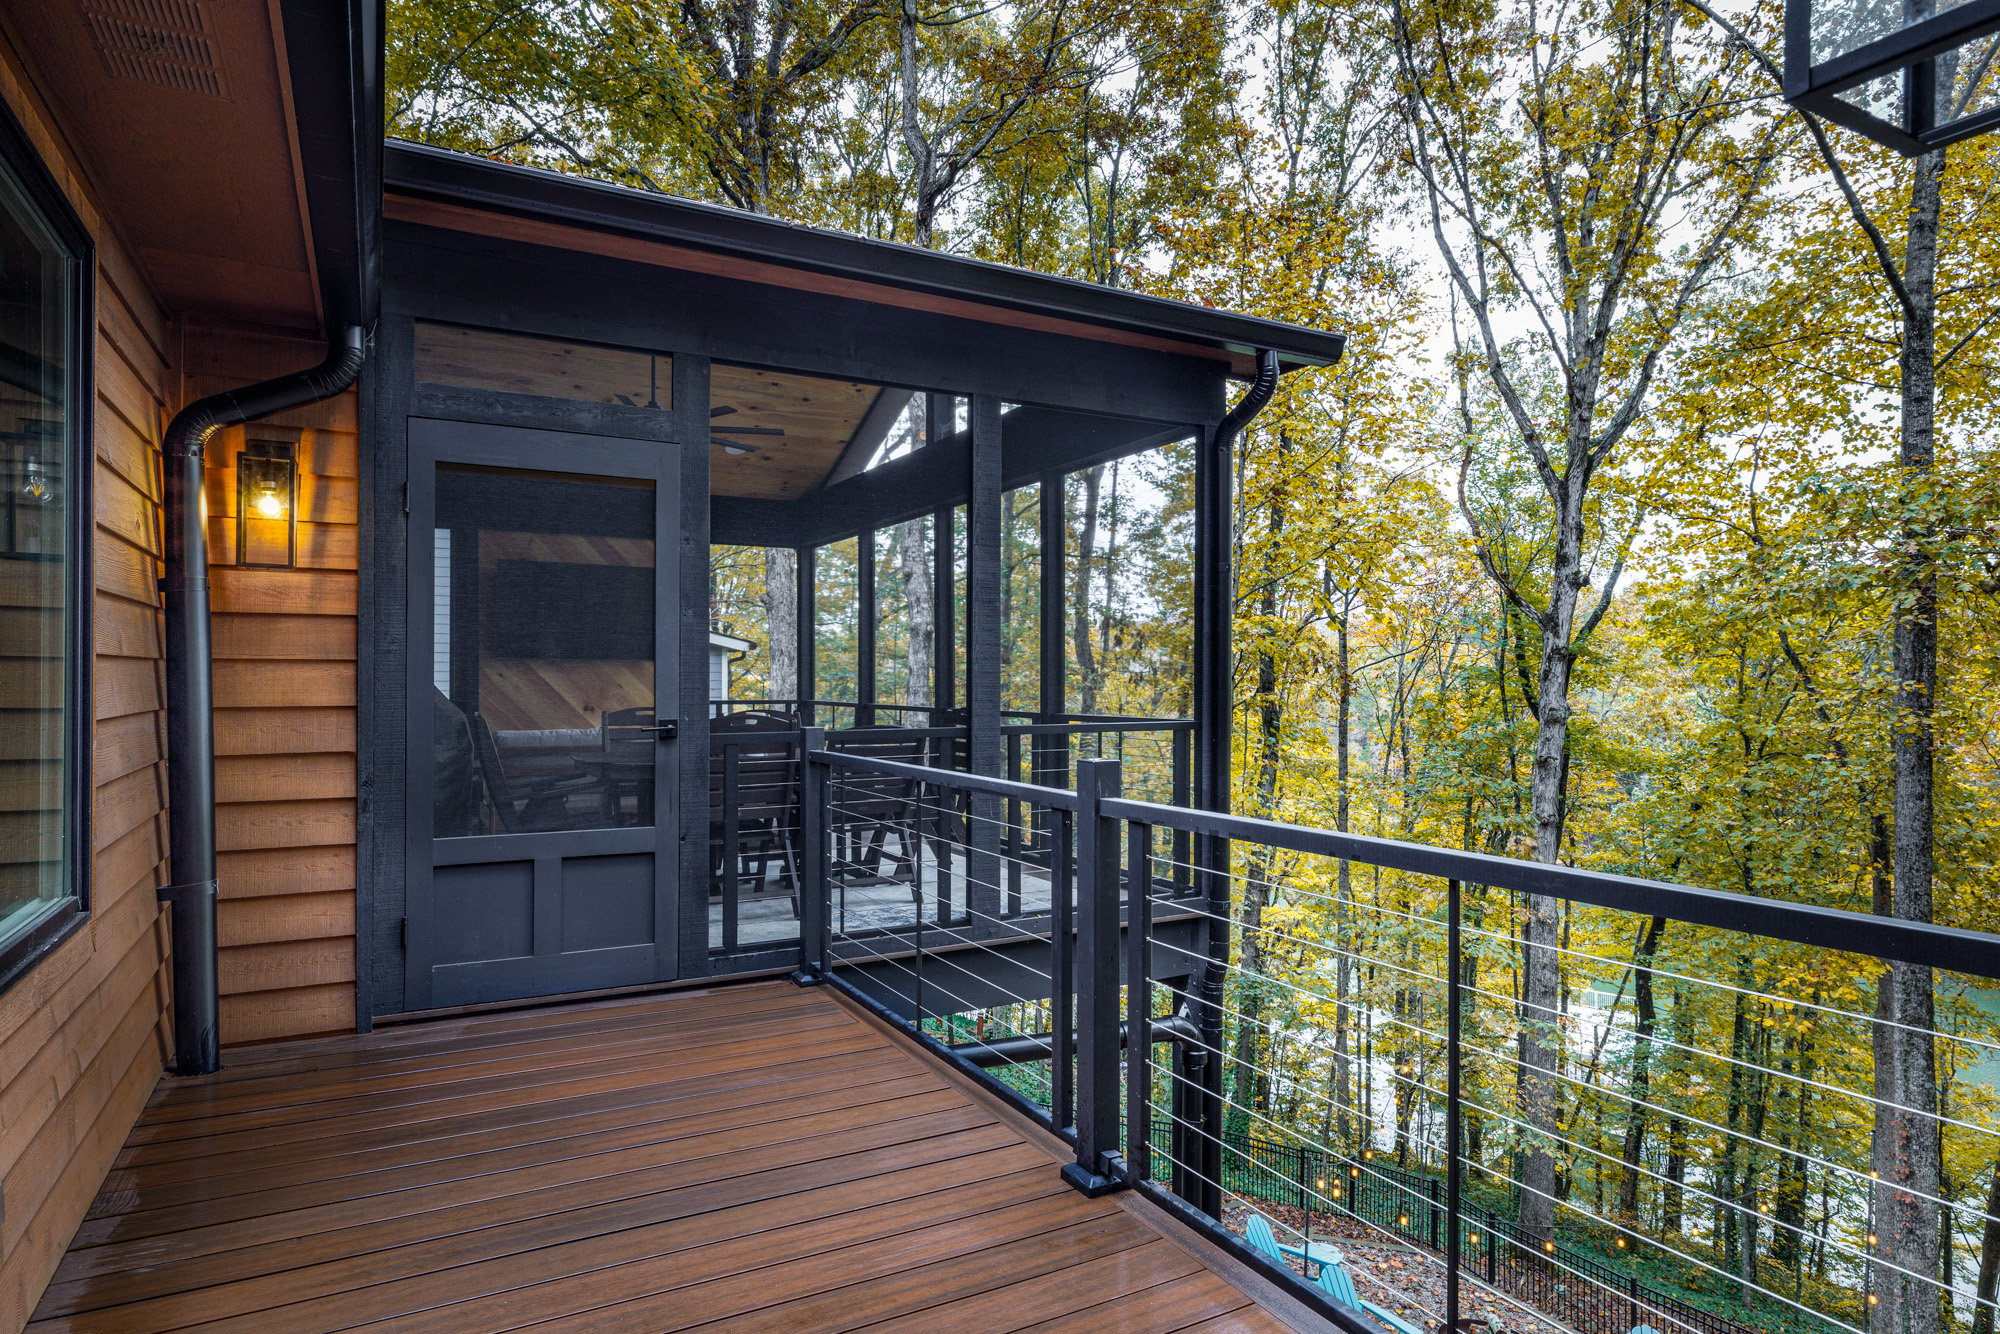 Wooden deck with screened porch area overlooking a serene forest in autumn.